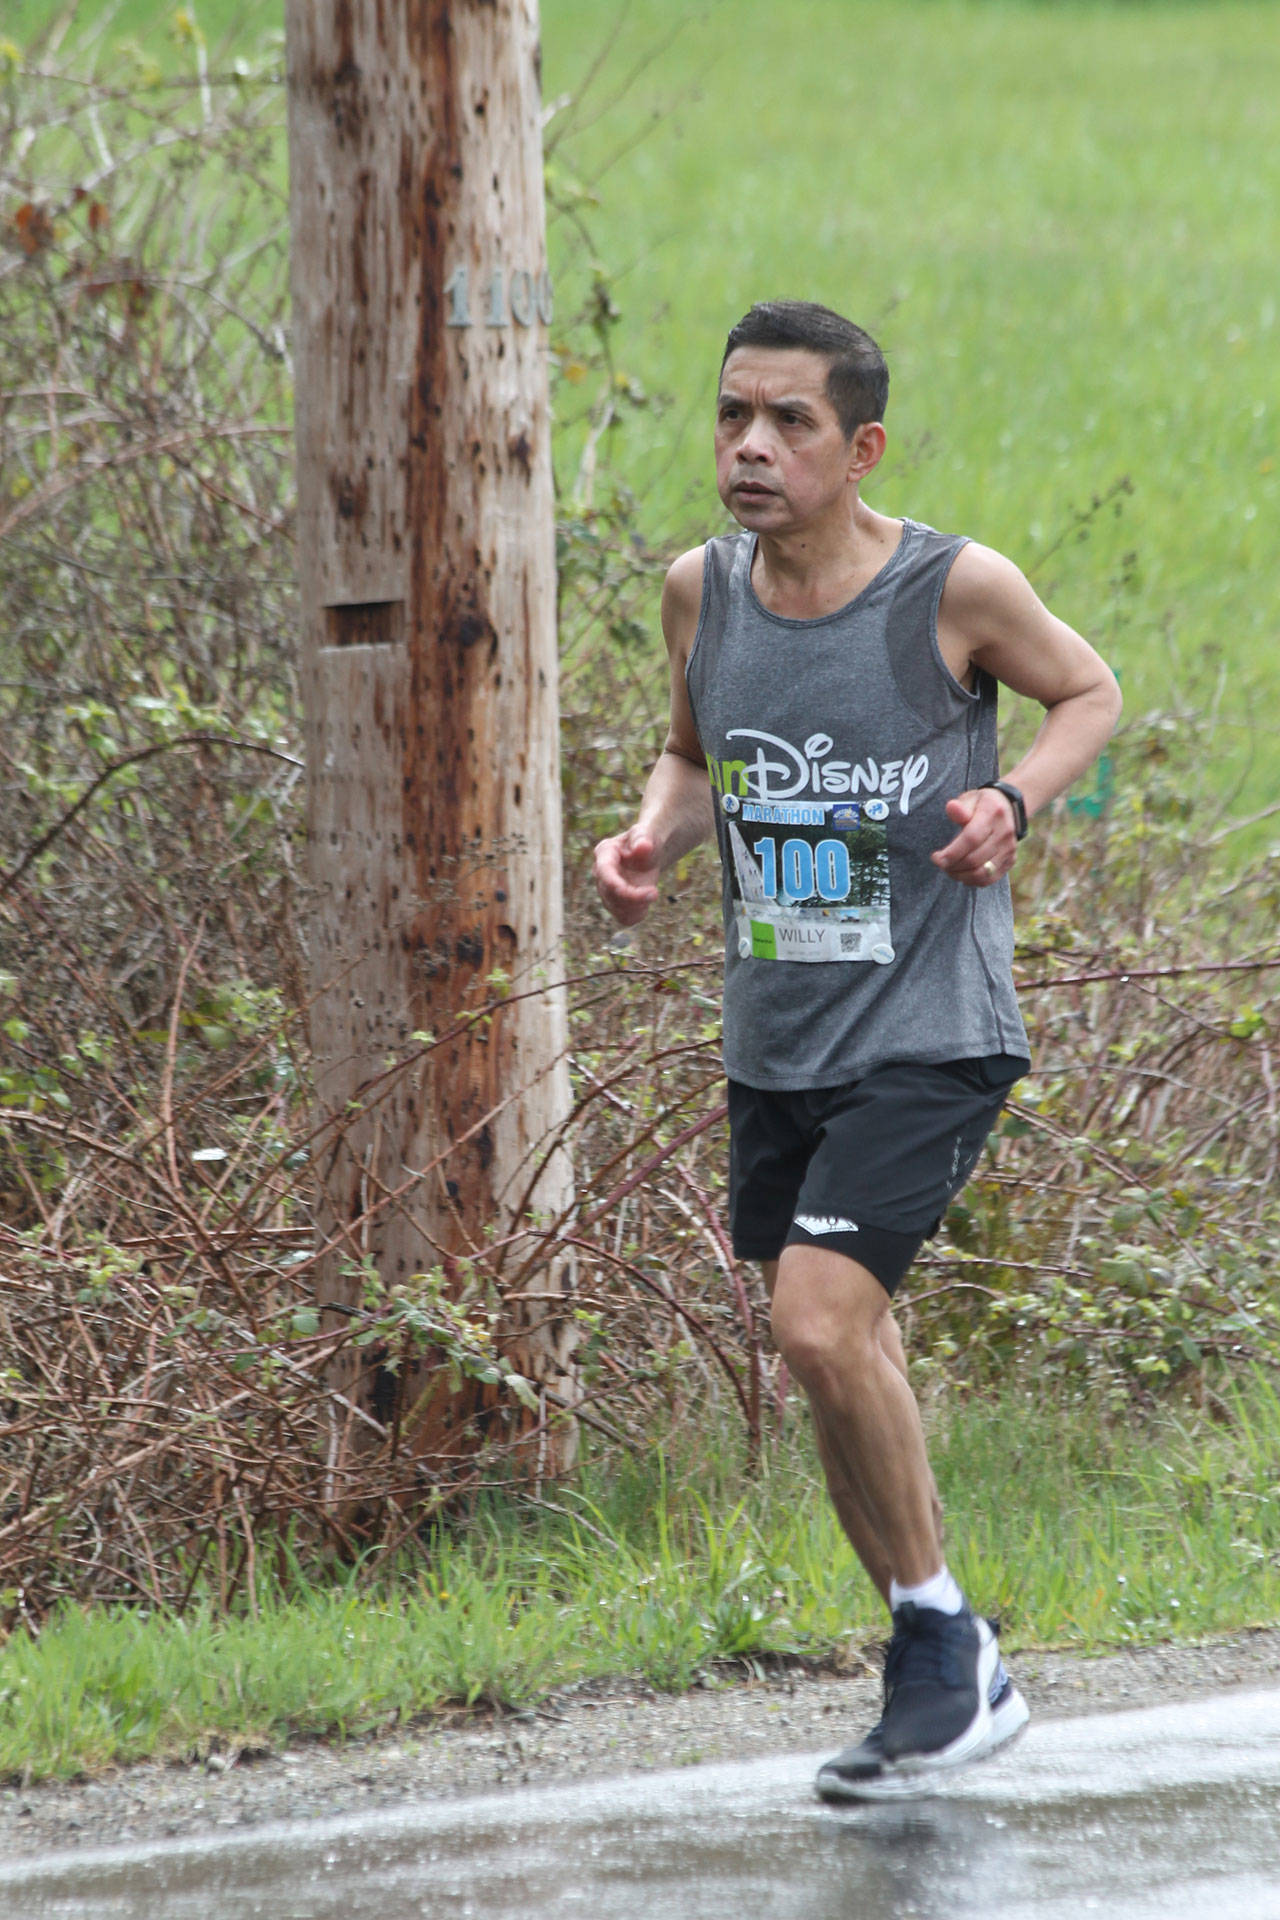 Oak Harbor’s Willy Mendoza, wearing bib 100, competes in his 100th marathon Sunday. (Photo by Jim Waller/Whidbey News-Times)